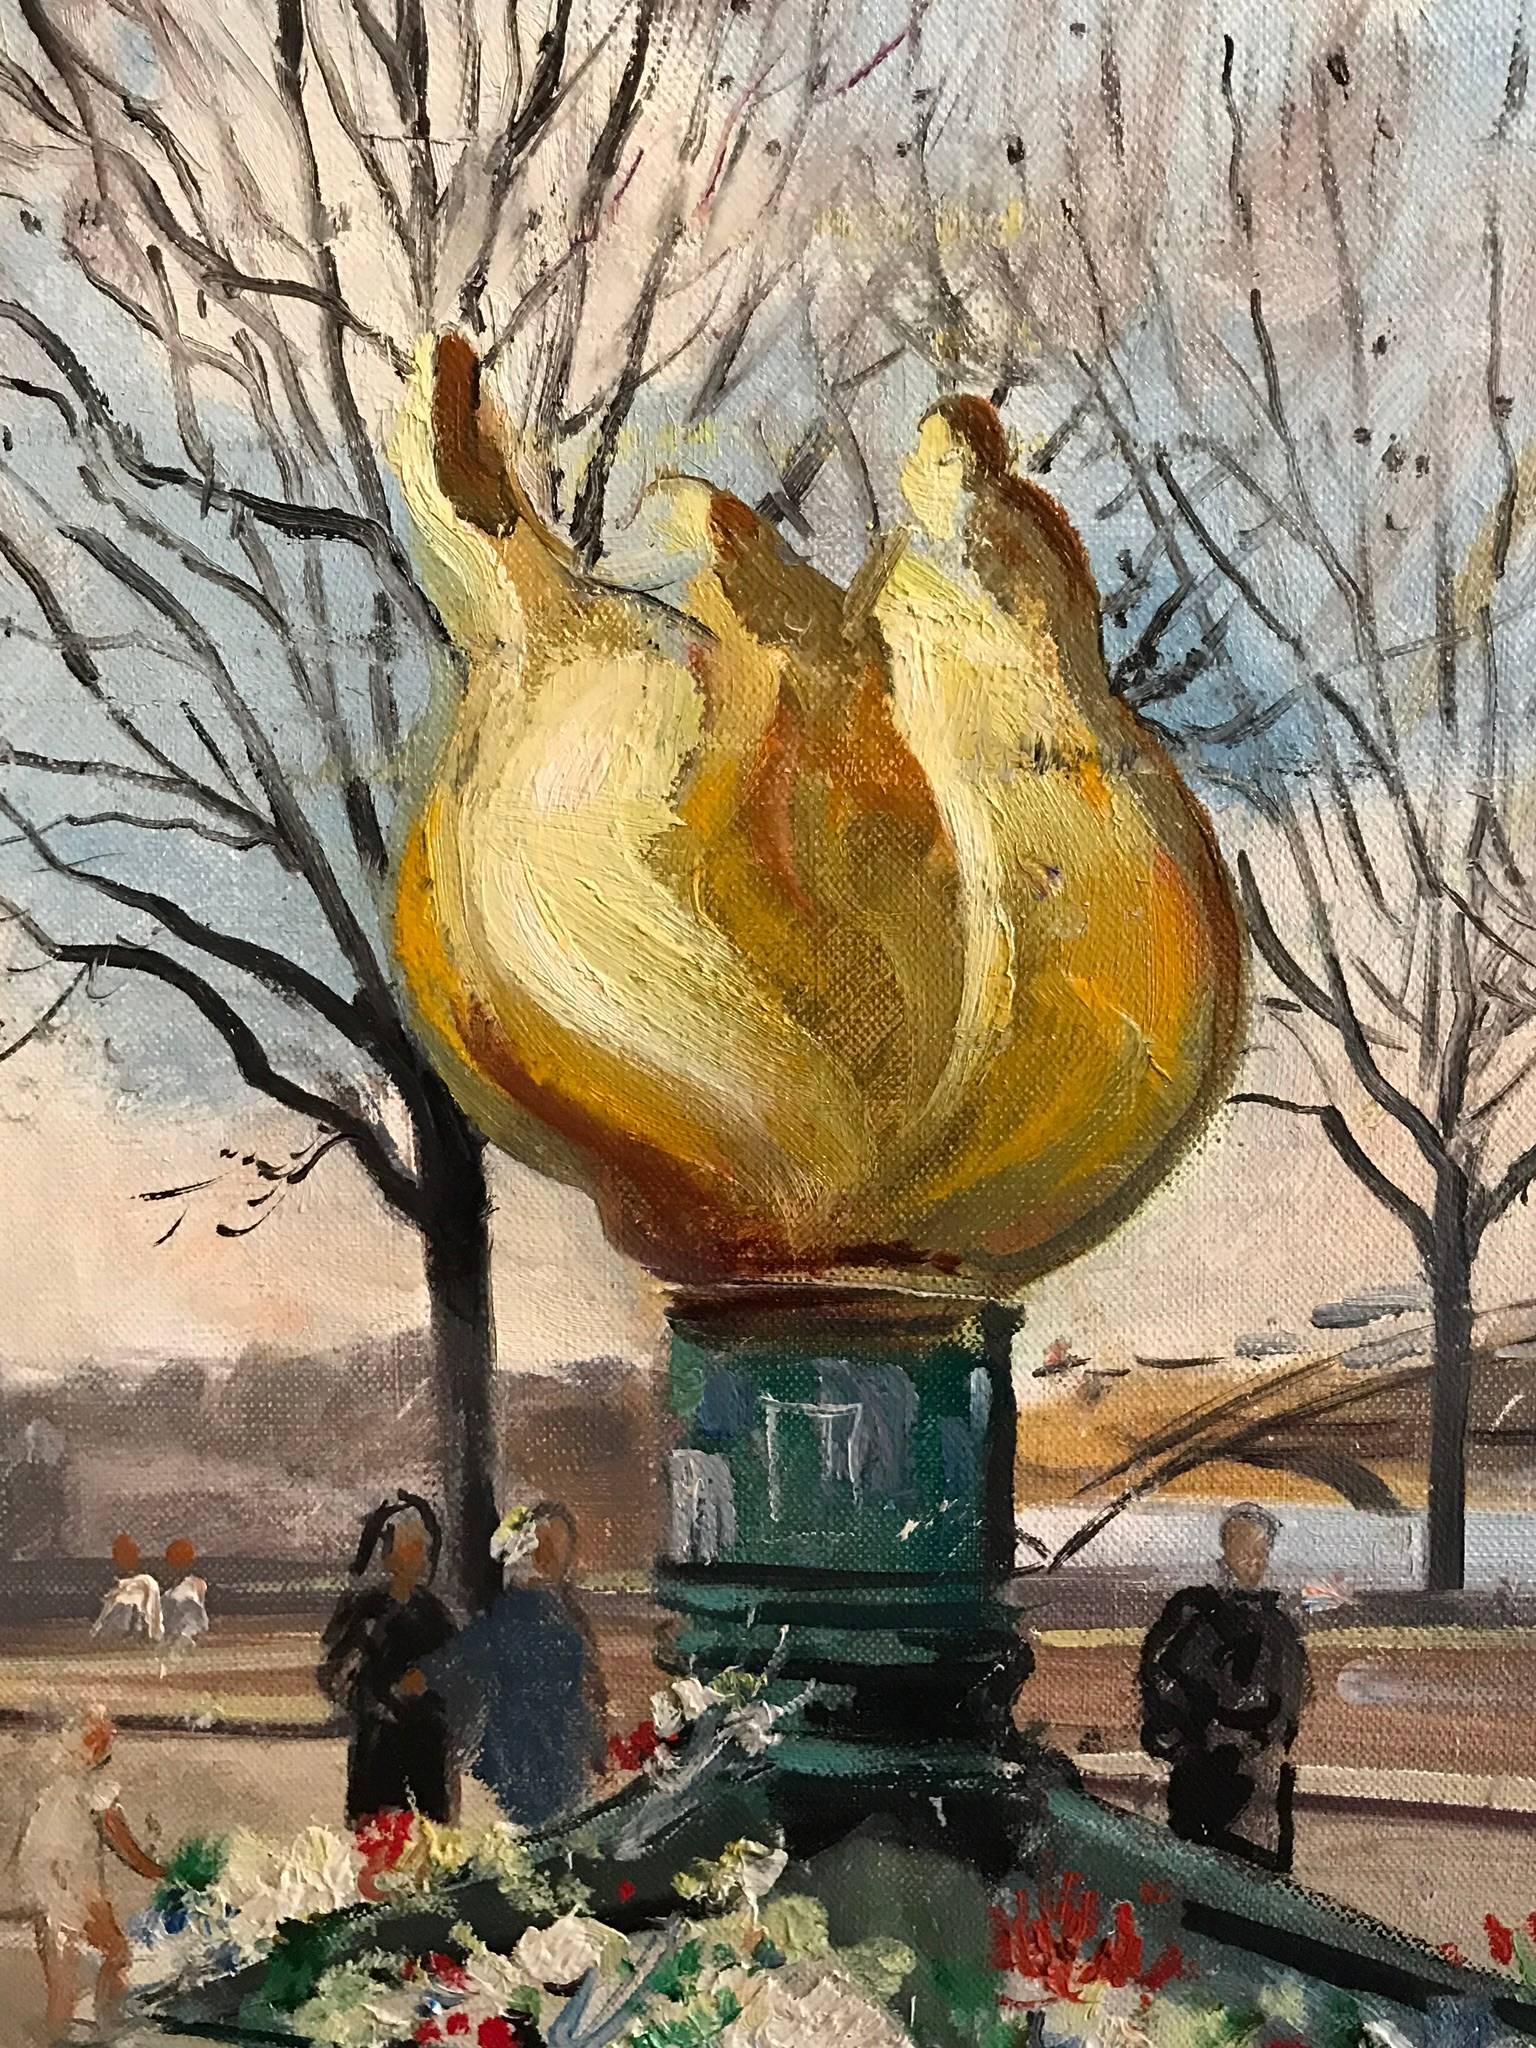 The Flame of Liberty, Paris
by Christian Ehlinger, French b. 1931
oil painting on canvas, unframed
signed lower left
canvas: 20 x 24 inches
provenance: private collection, Paris

Fine oil painting on canvas, by the well respected and admired French